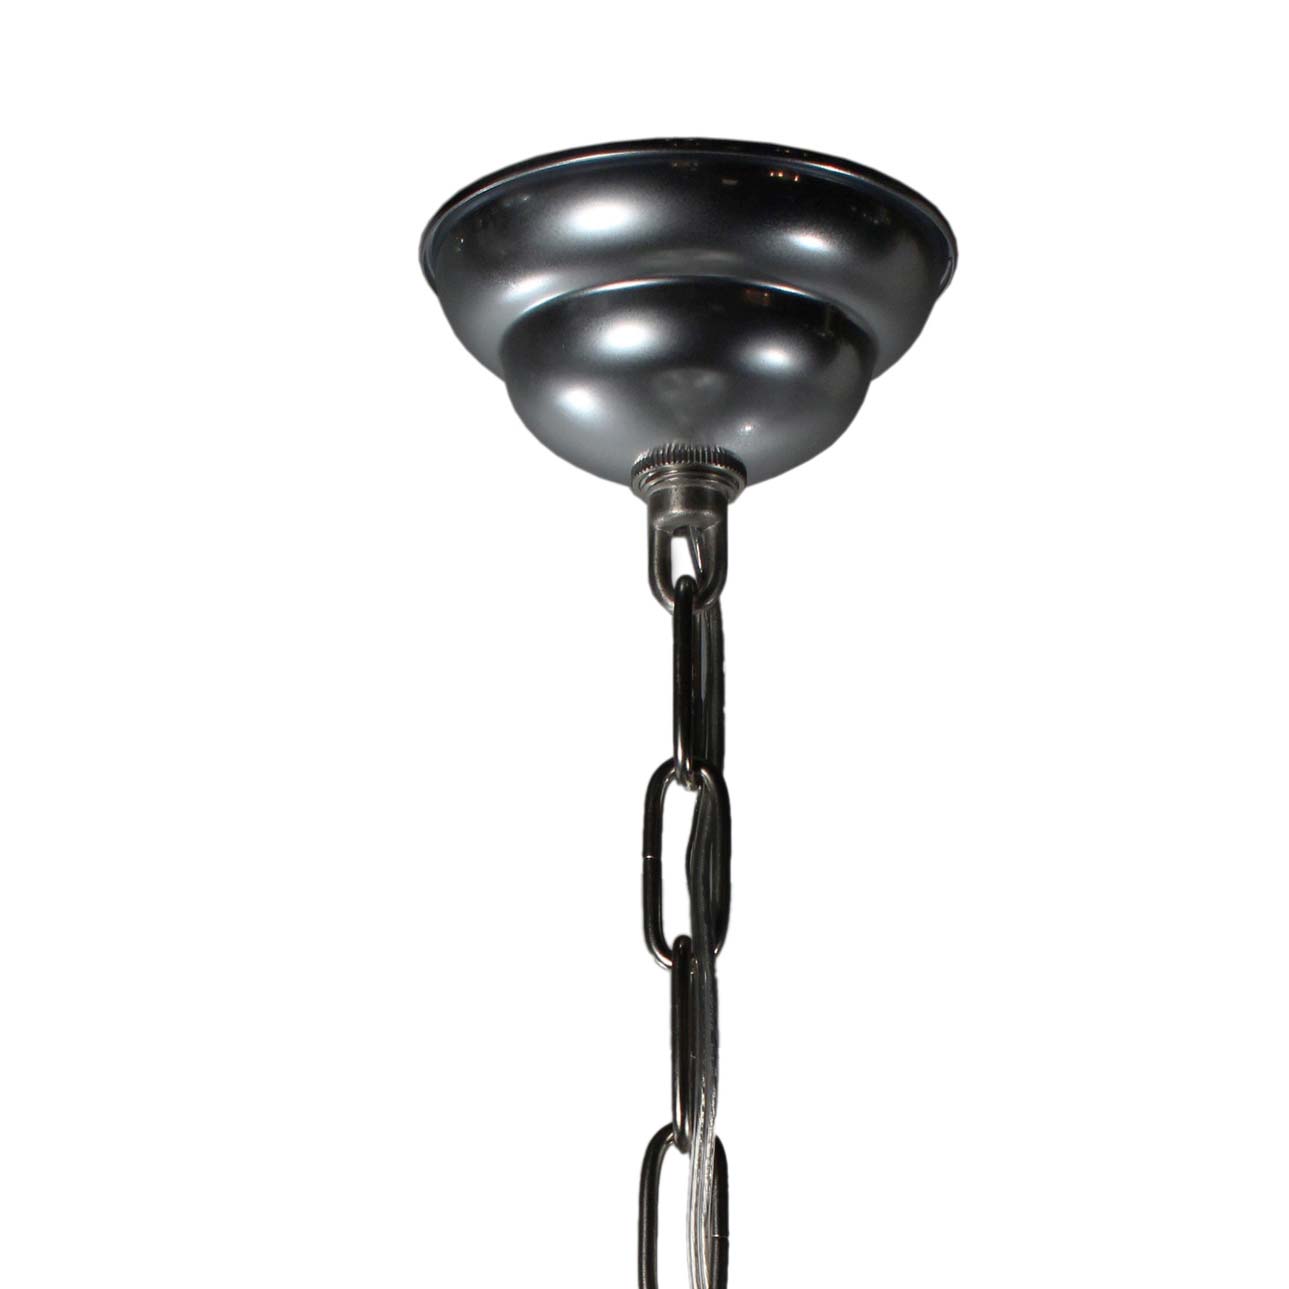 SOLD Art Deco Skyscraper Pendant with Two-Part Prismatic Shade, Antique Lighting-70558